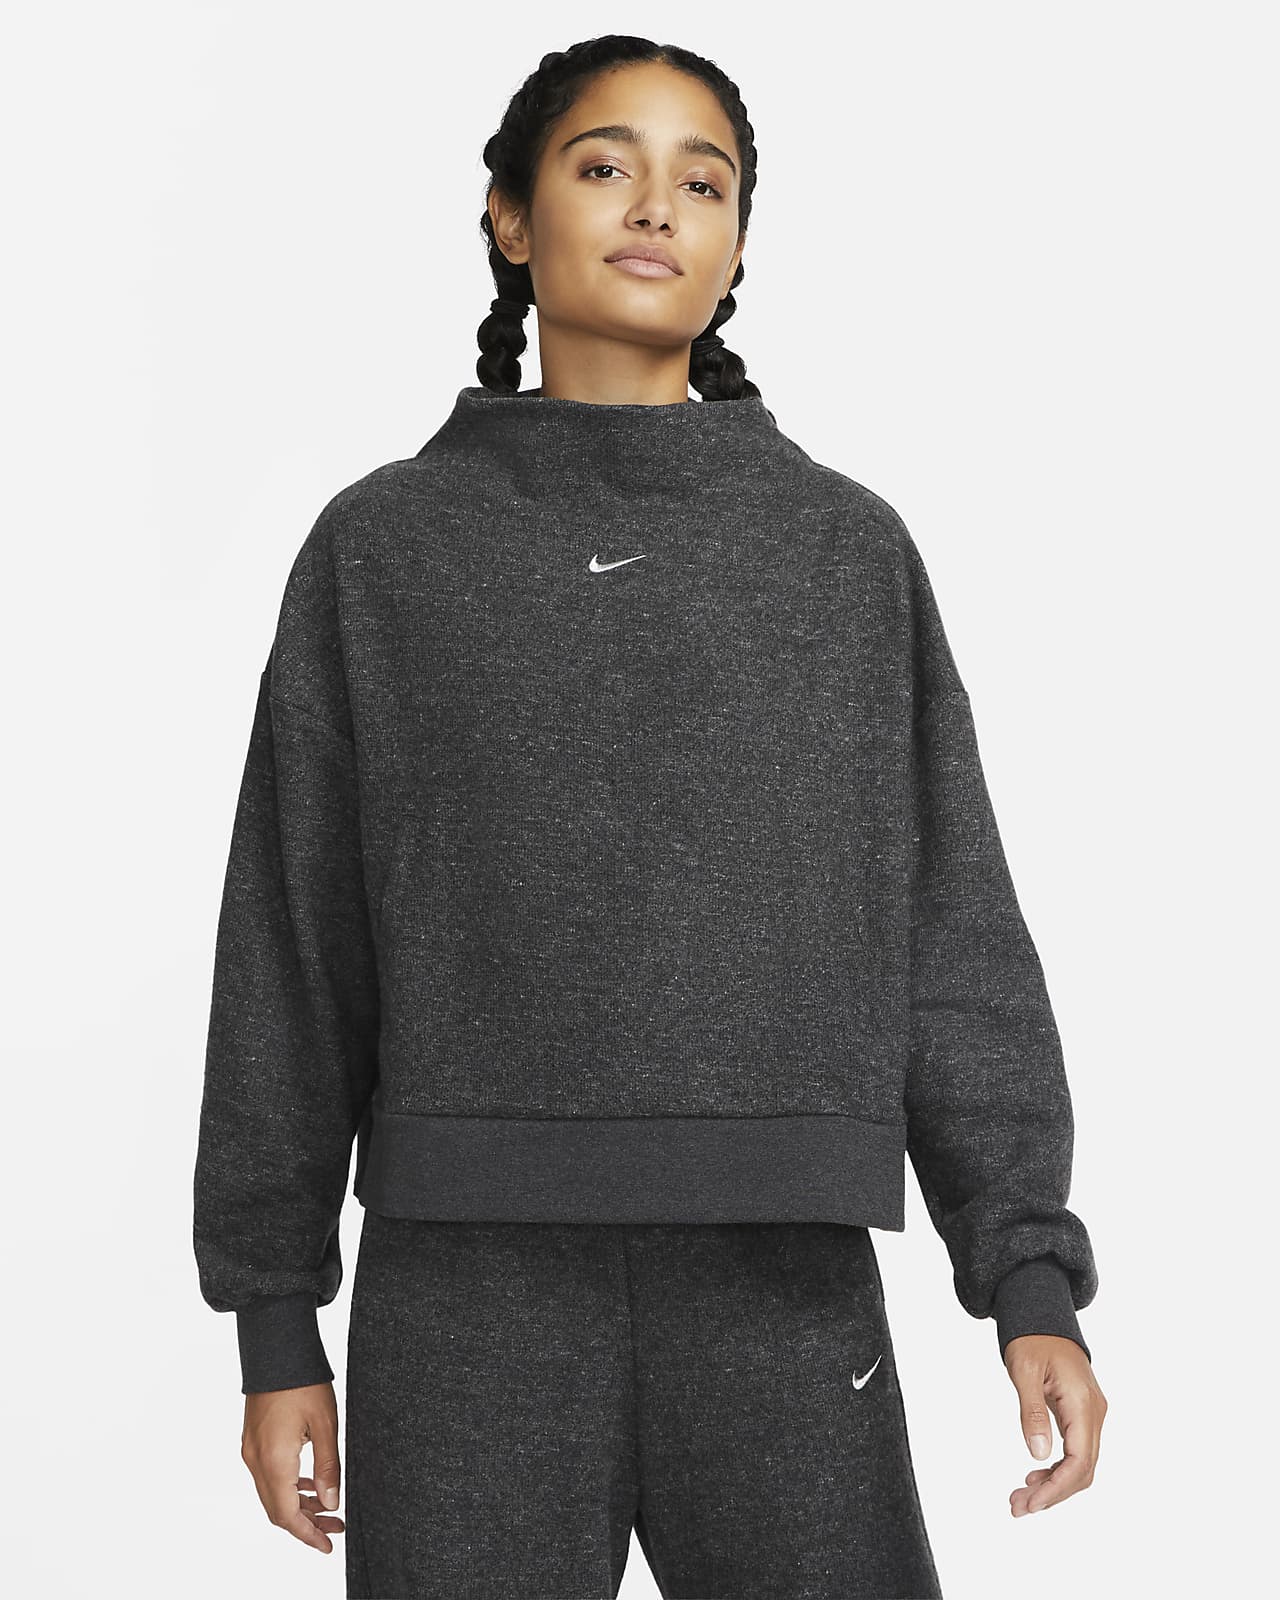 Nike Therma-FIT Women's Mock-Neck Training Top